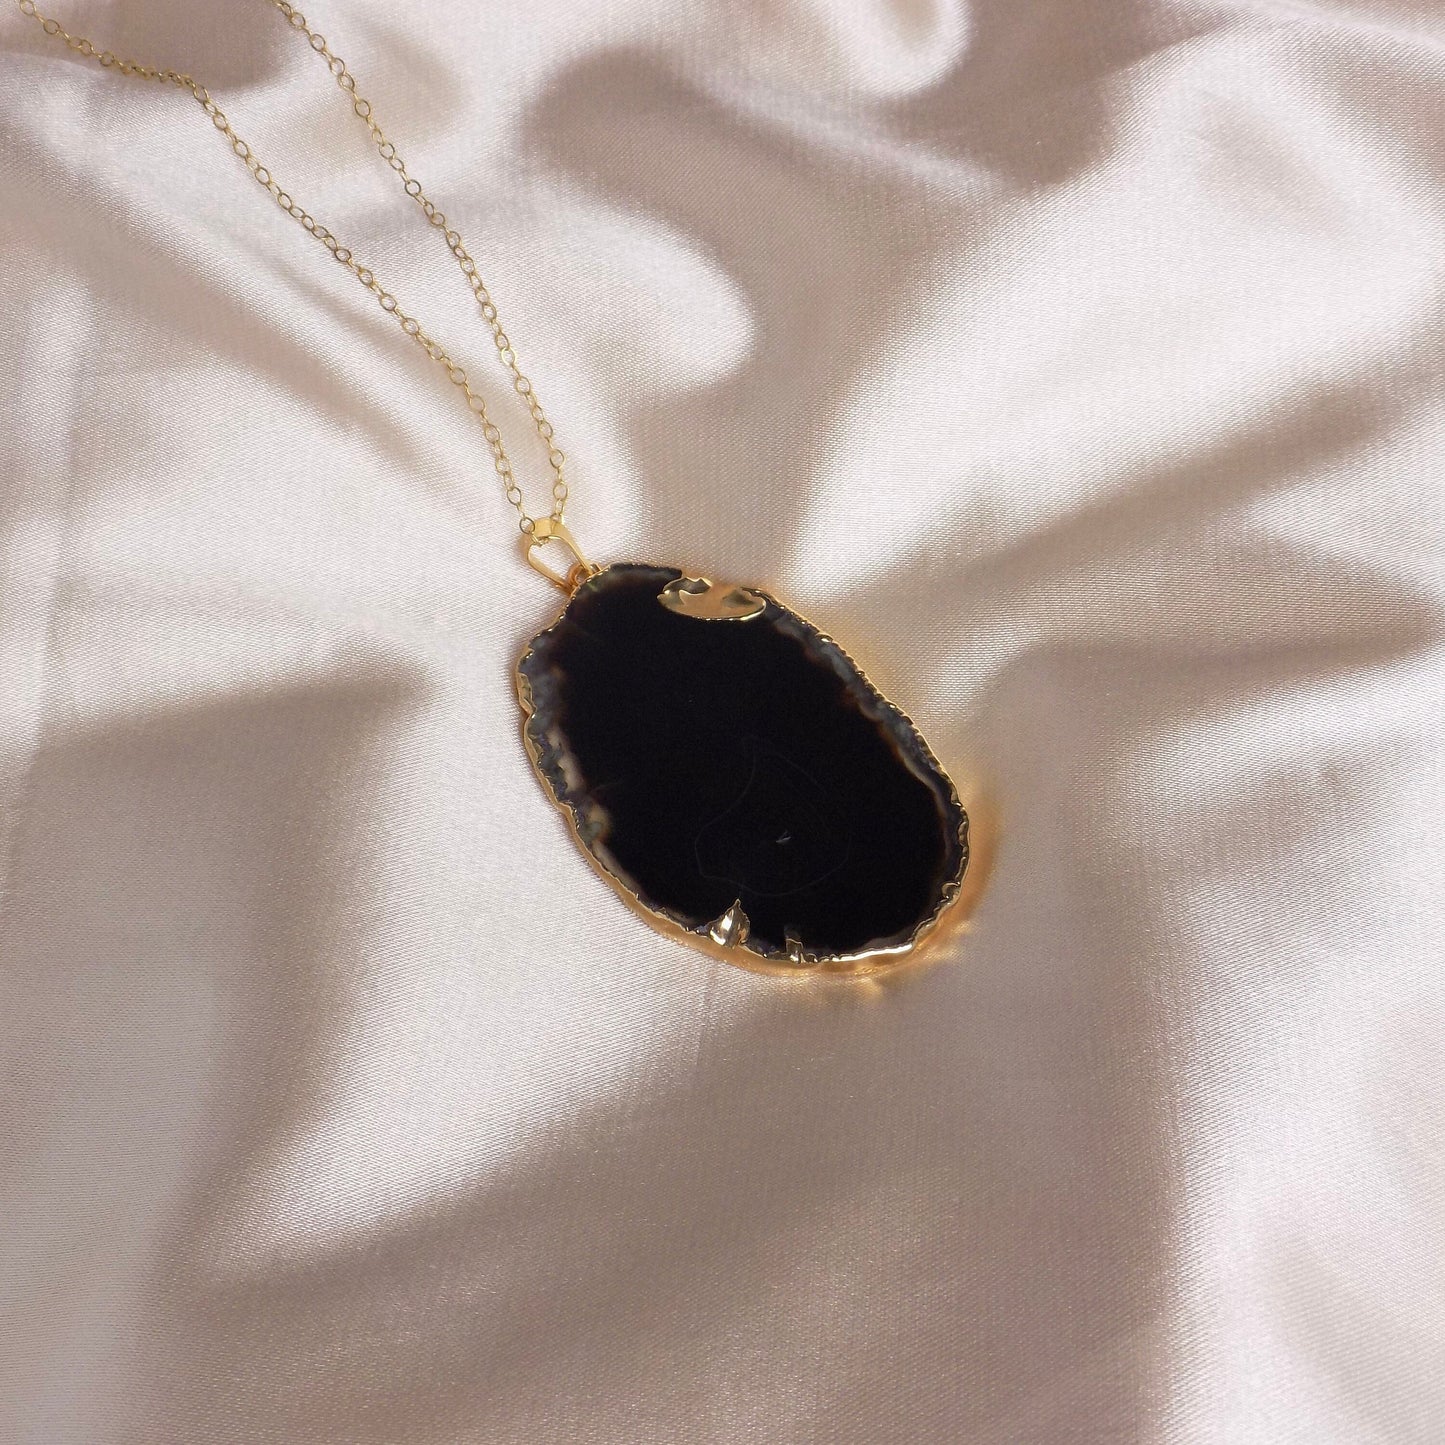 Large Black Agate Necklace Gold, Crystal Slice Pendant For Women, Gifts For Mom, G15-148